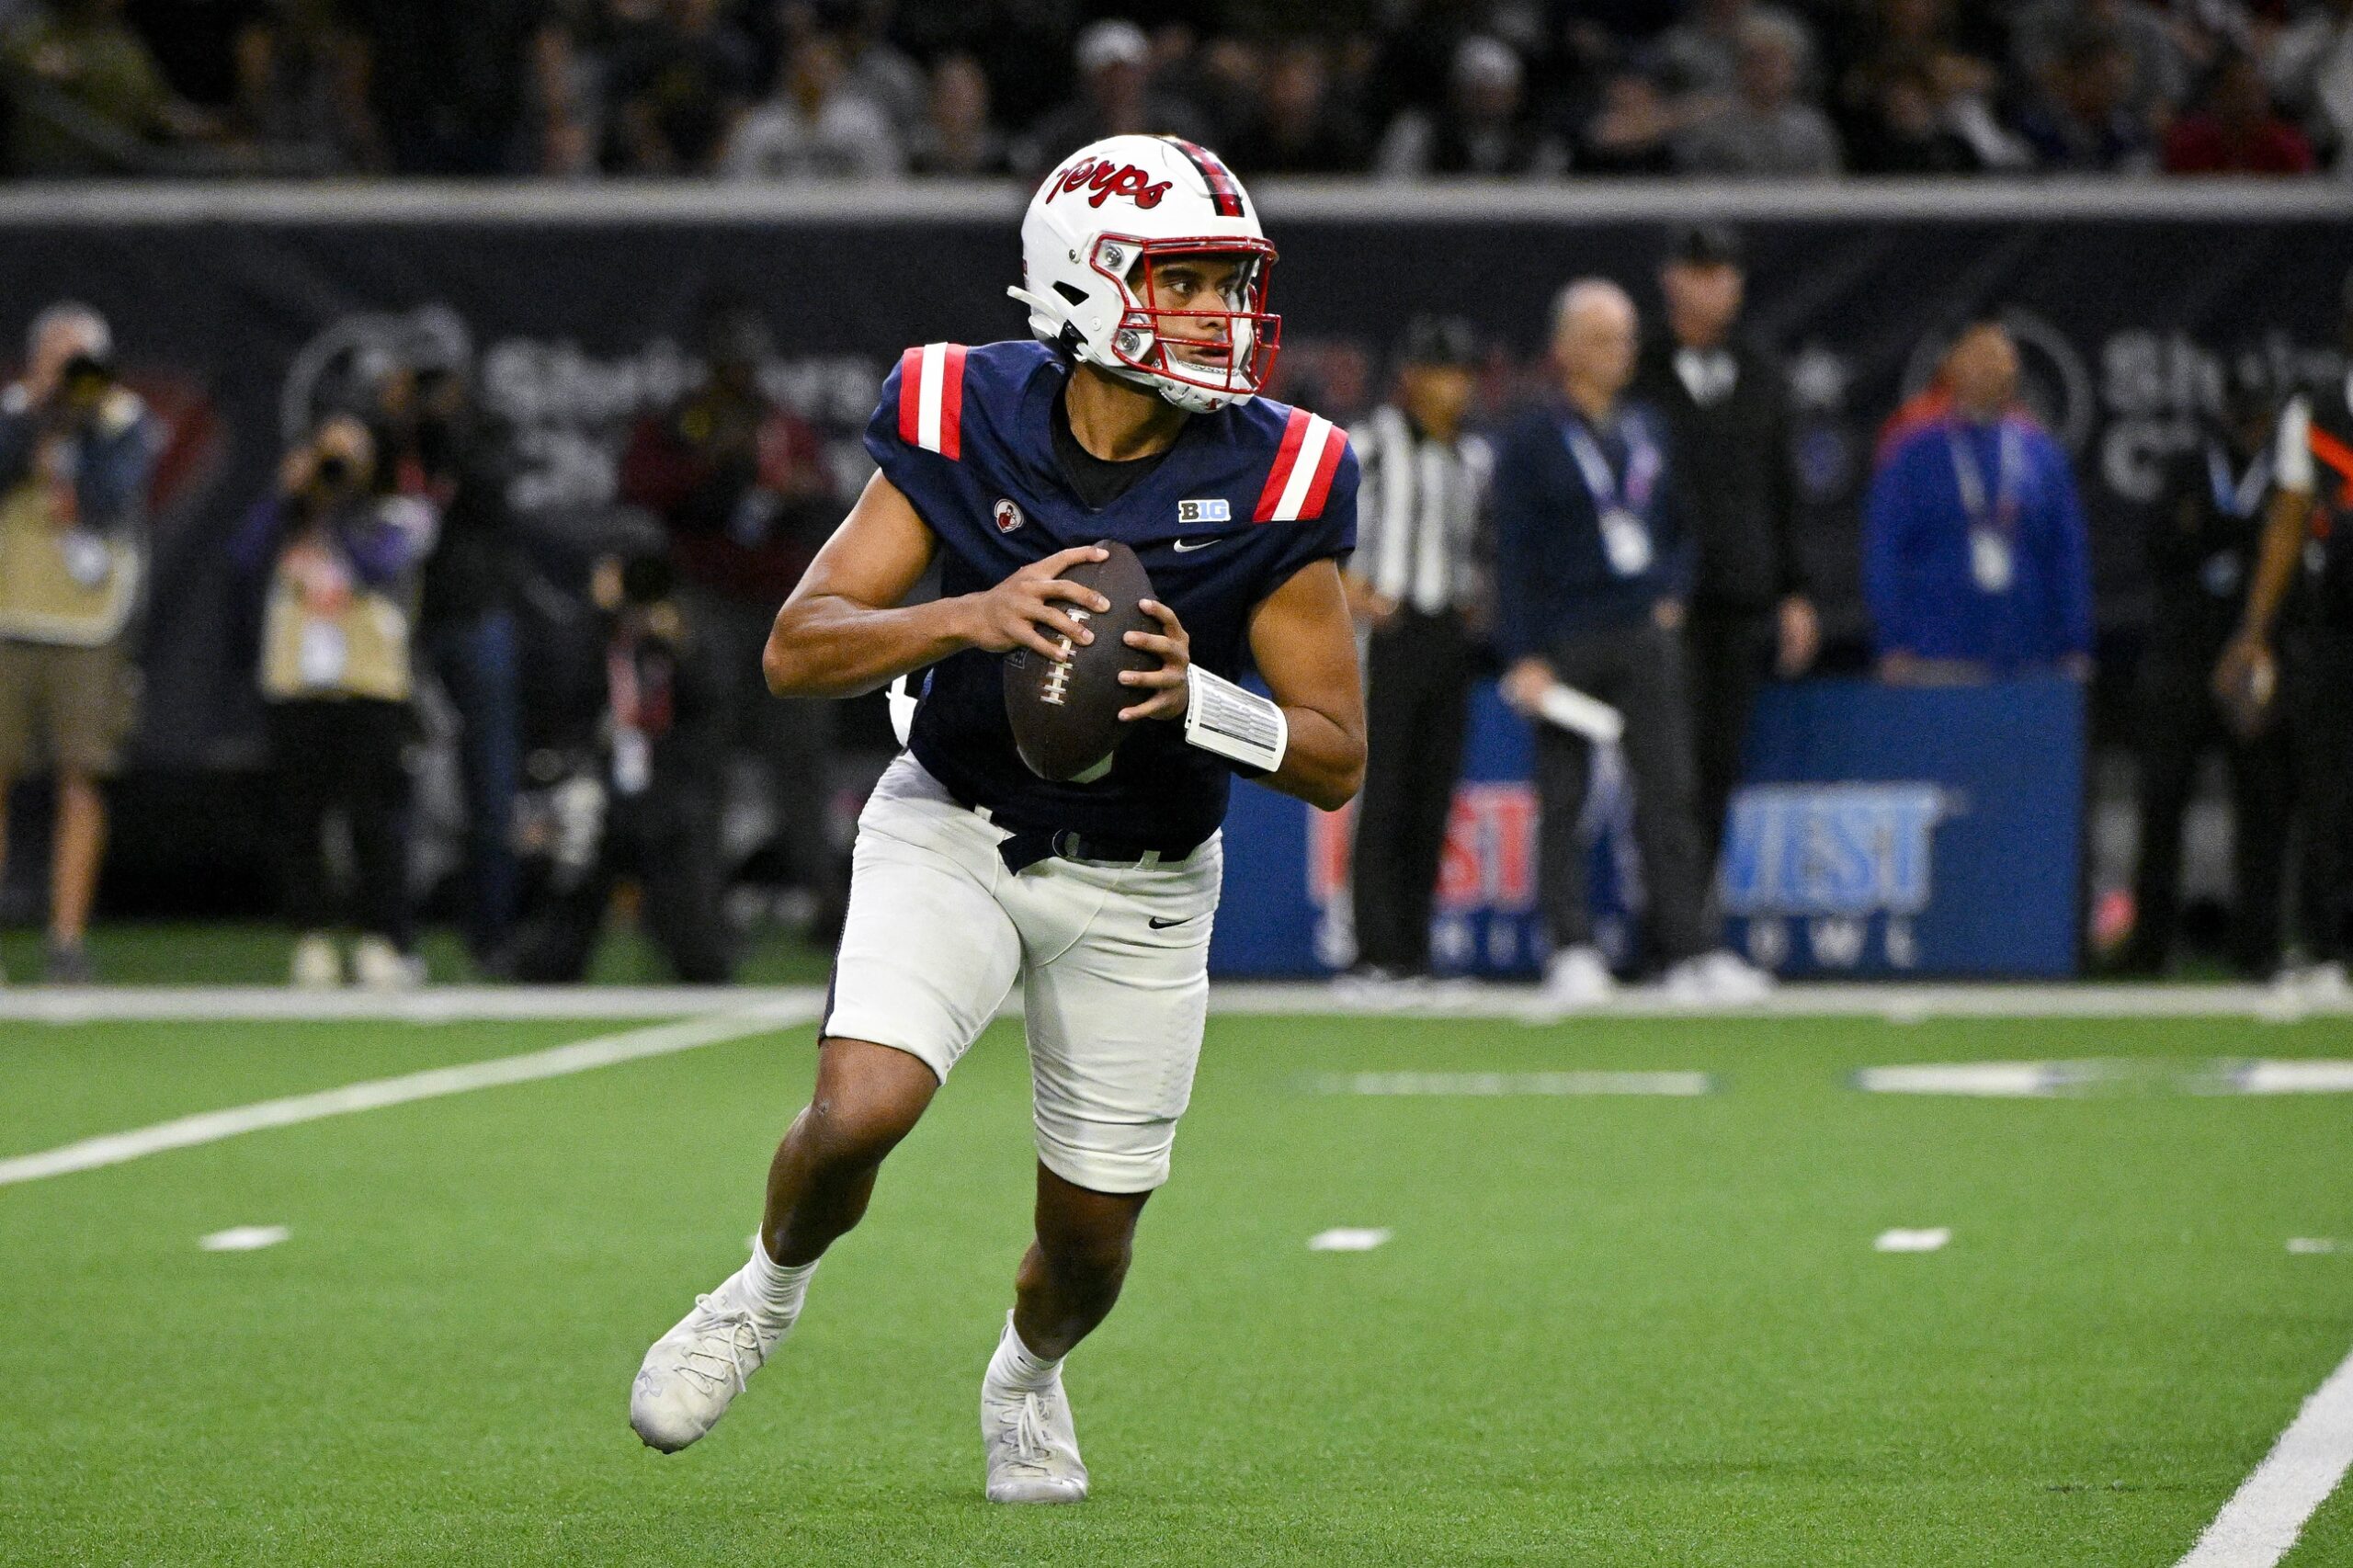 West quarterback Taulia Tagovailoa of Maryland (5) runs with the ball during the first half against the East at the Ford Center at The Star.